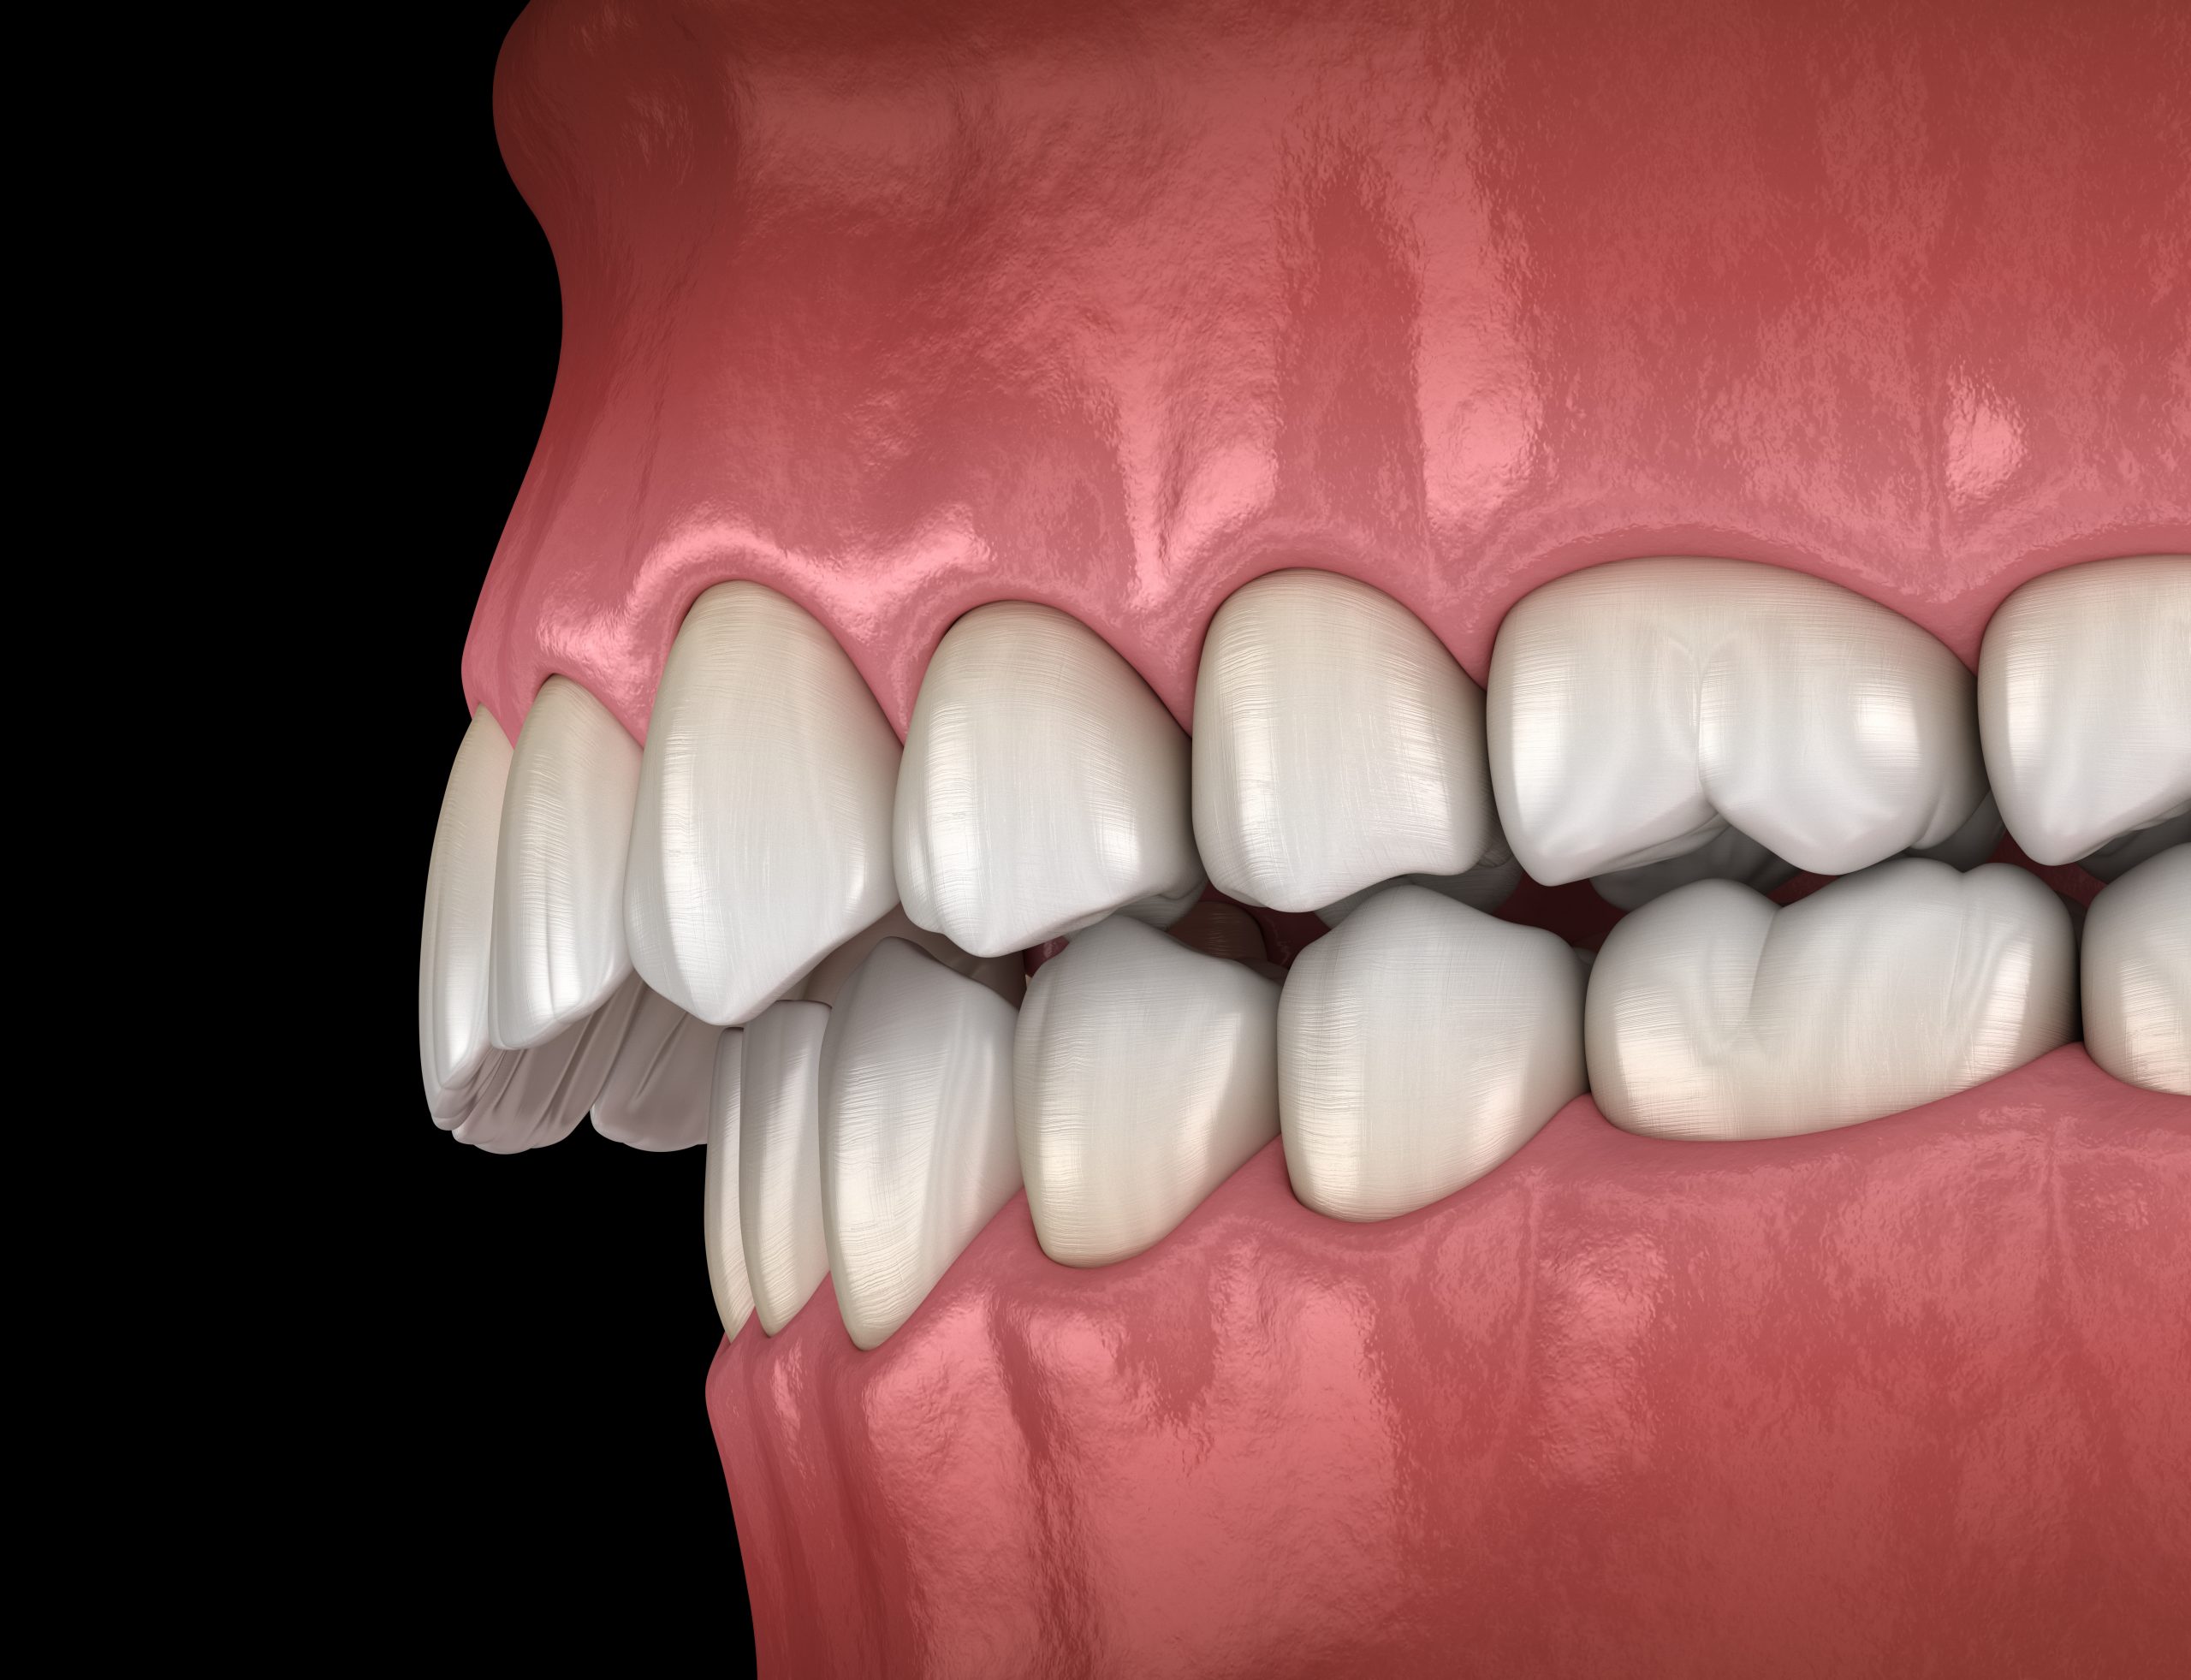 rendering of extreme overbite